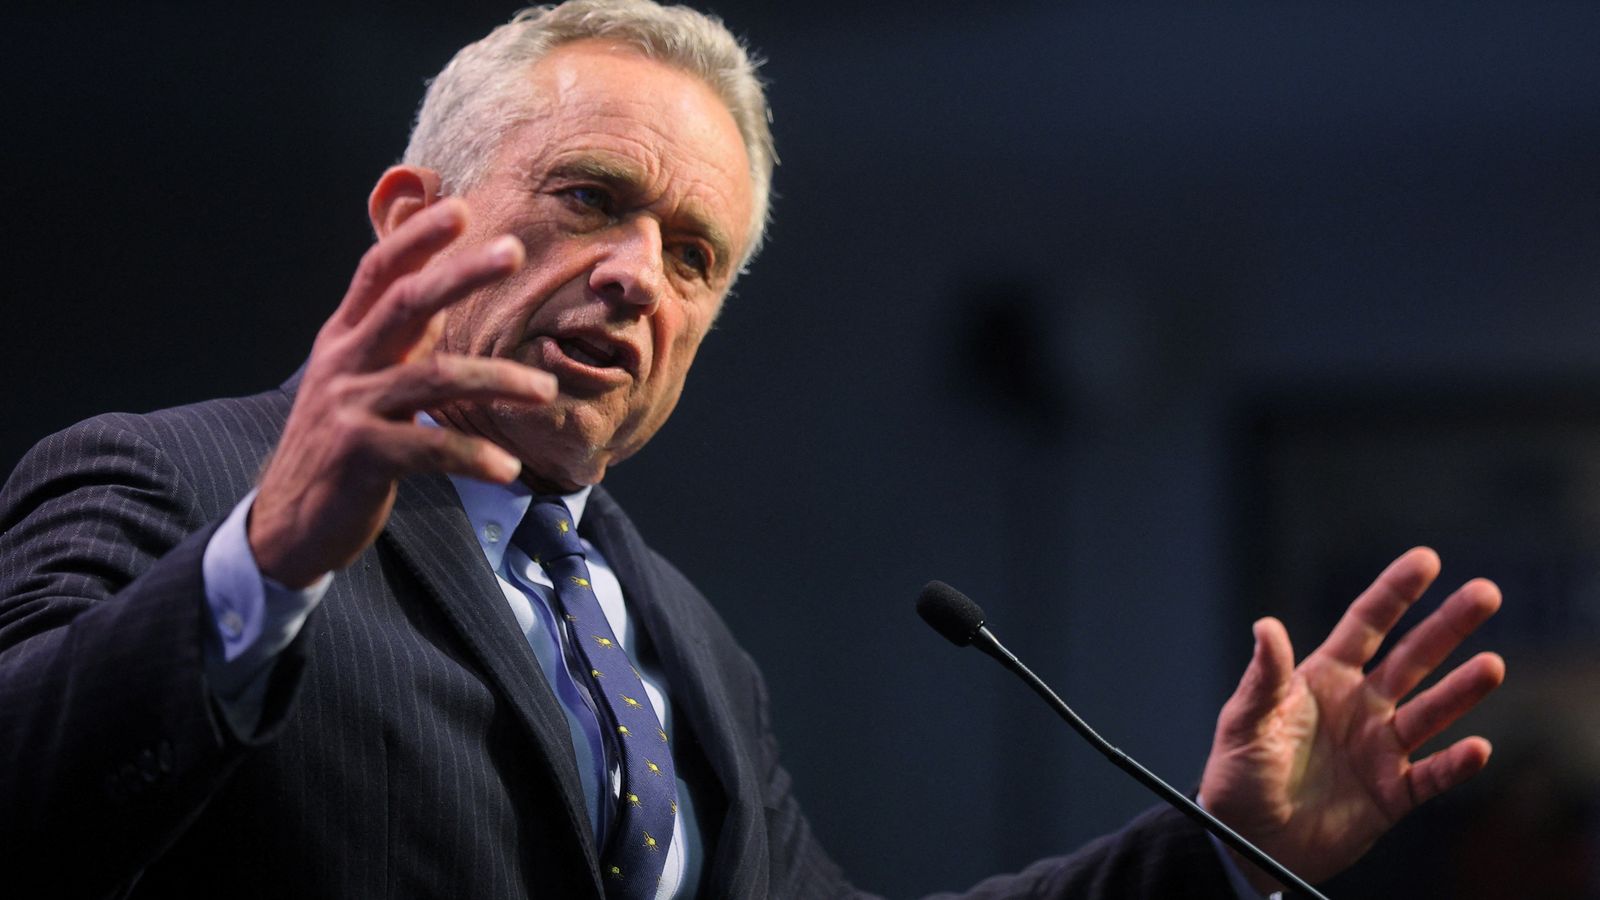 Robert F Kennedy Jr's family condemn him over COVID remarks branded racist and antisemitic